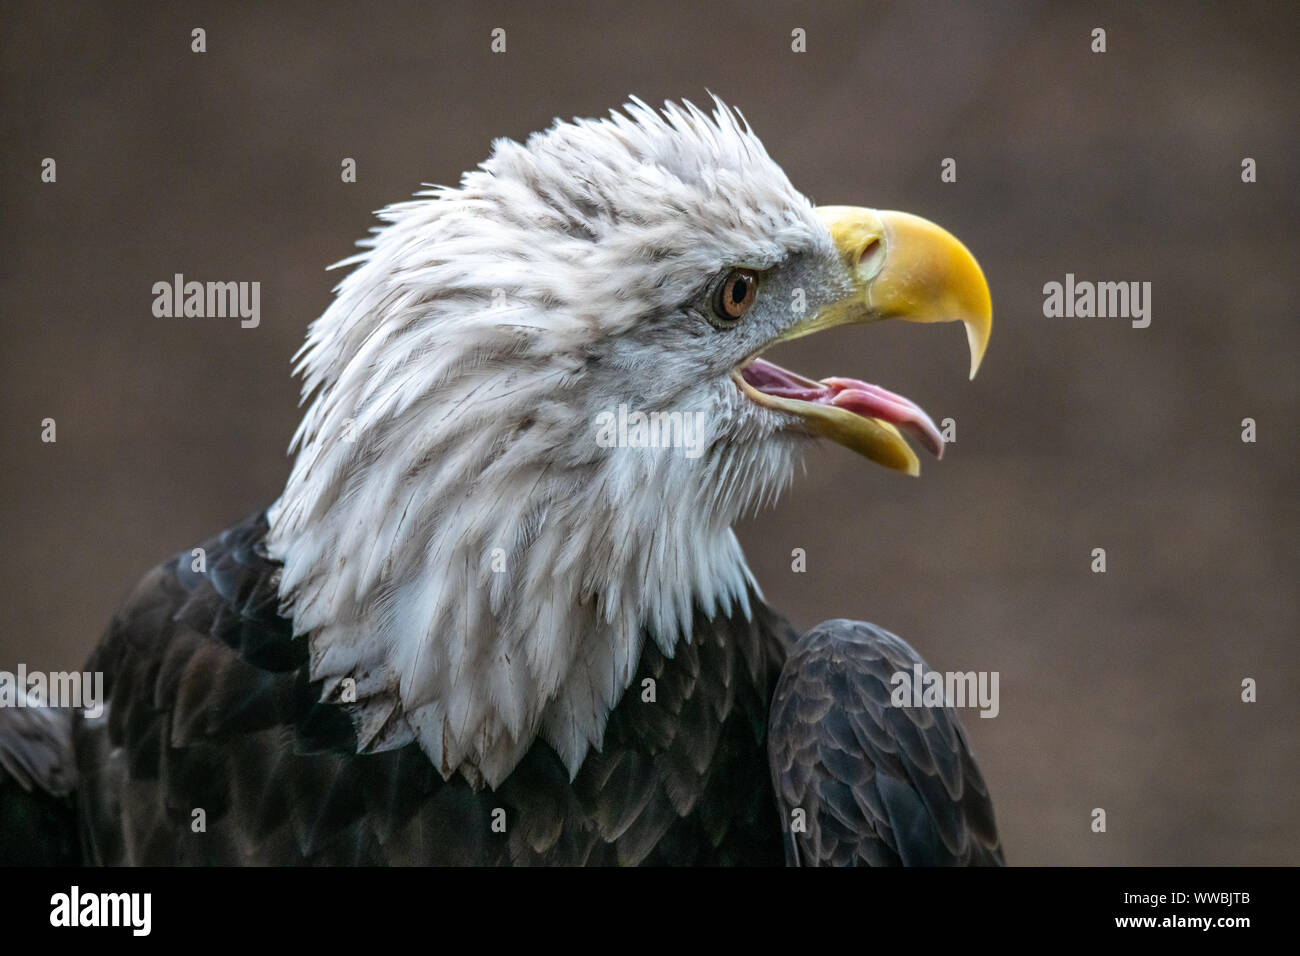 New York, USA,  14 September 2019.  A Bald Eagle (Haliaeetus leucocephalus) is displayed at the annual Raptor Fest event organized by the New York Cit Stock Photo